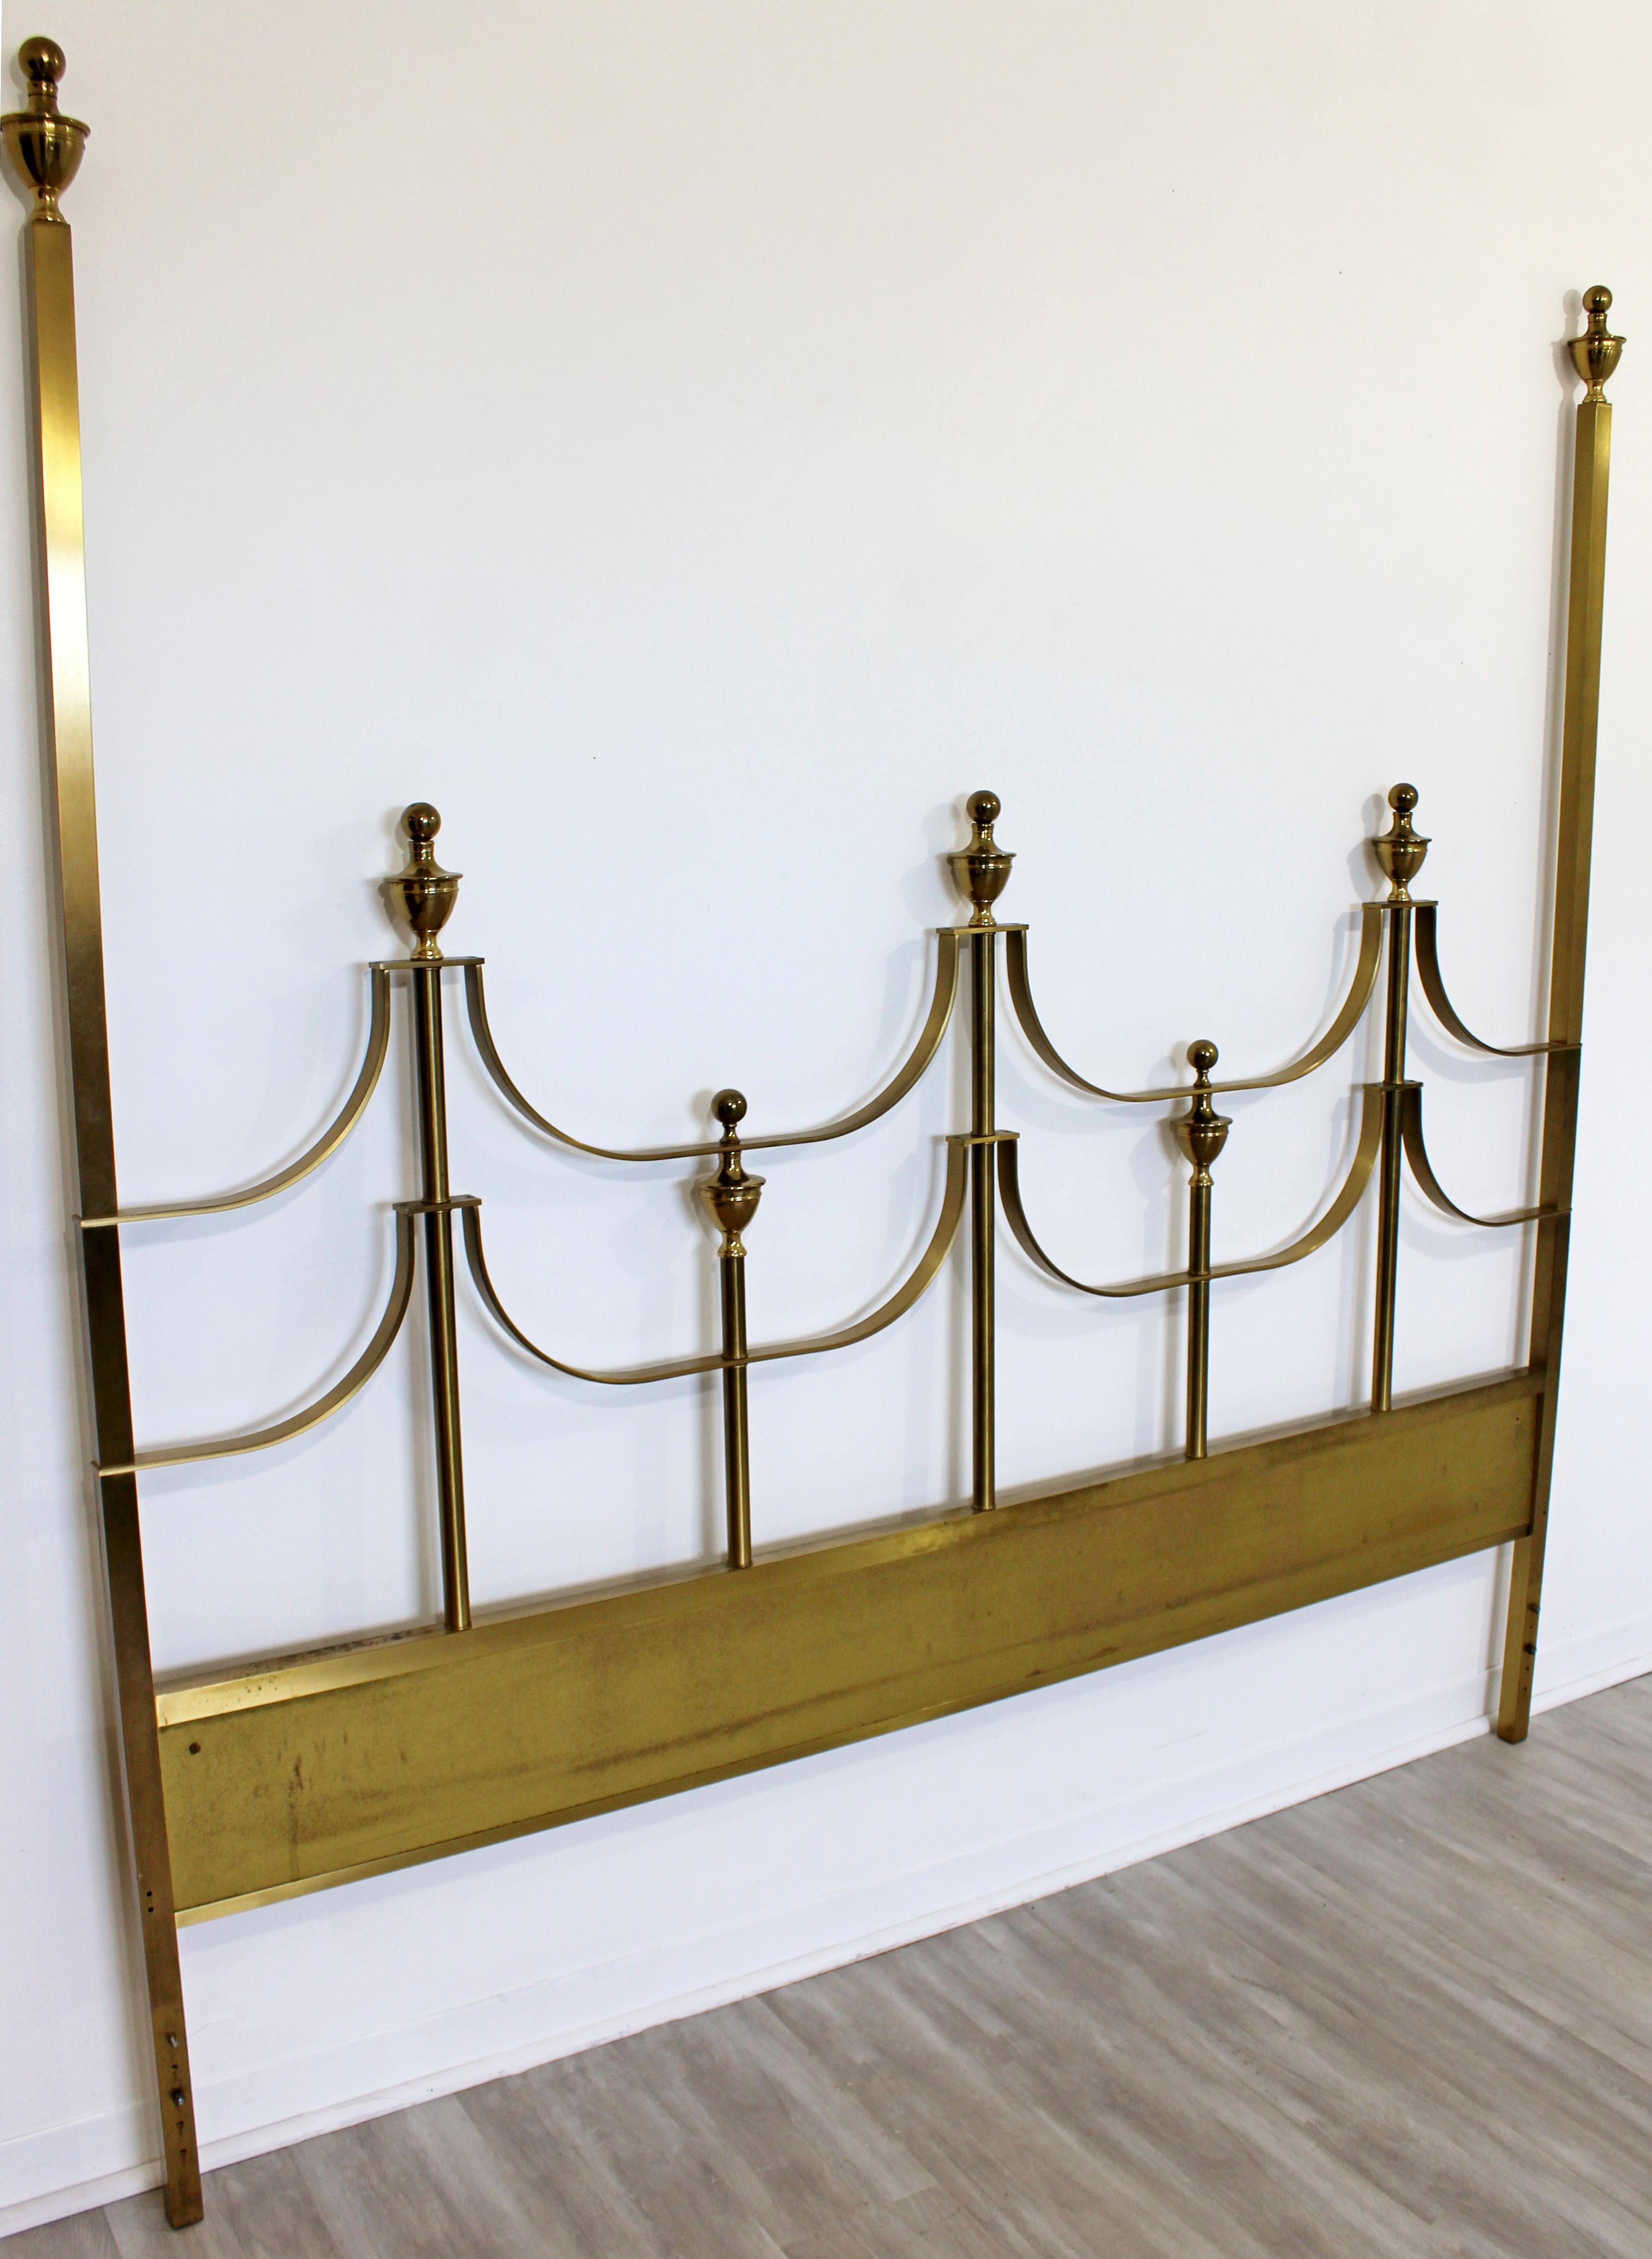 For your consideration is a spectacular, Hollywood Regency style, brass King sized headboard, by Mastercraft, circa 1970s. In very good vintage condition. The dimensions are 77.5